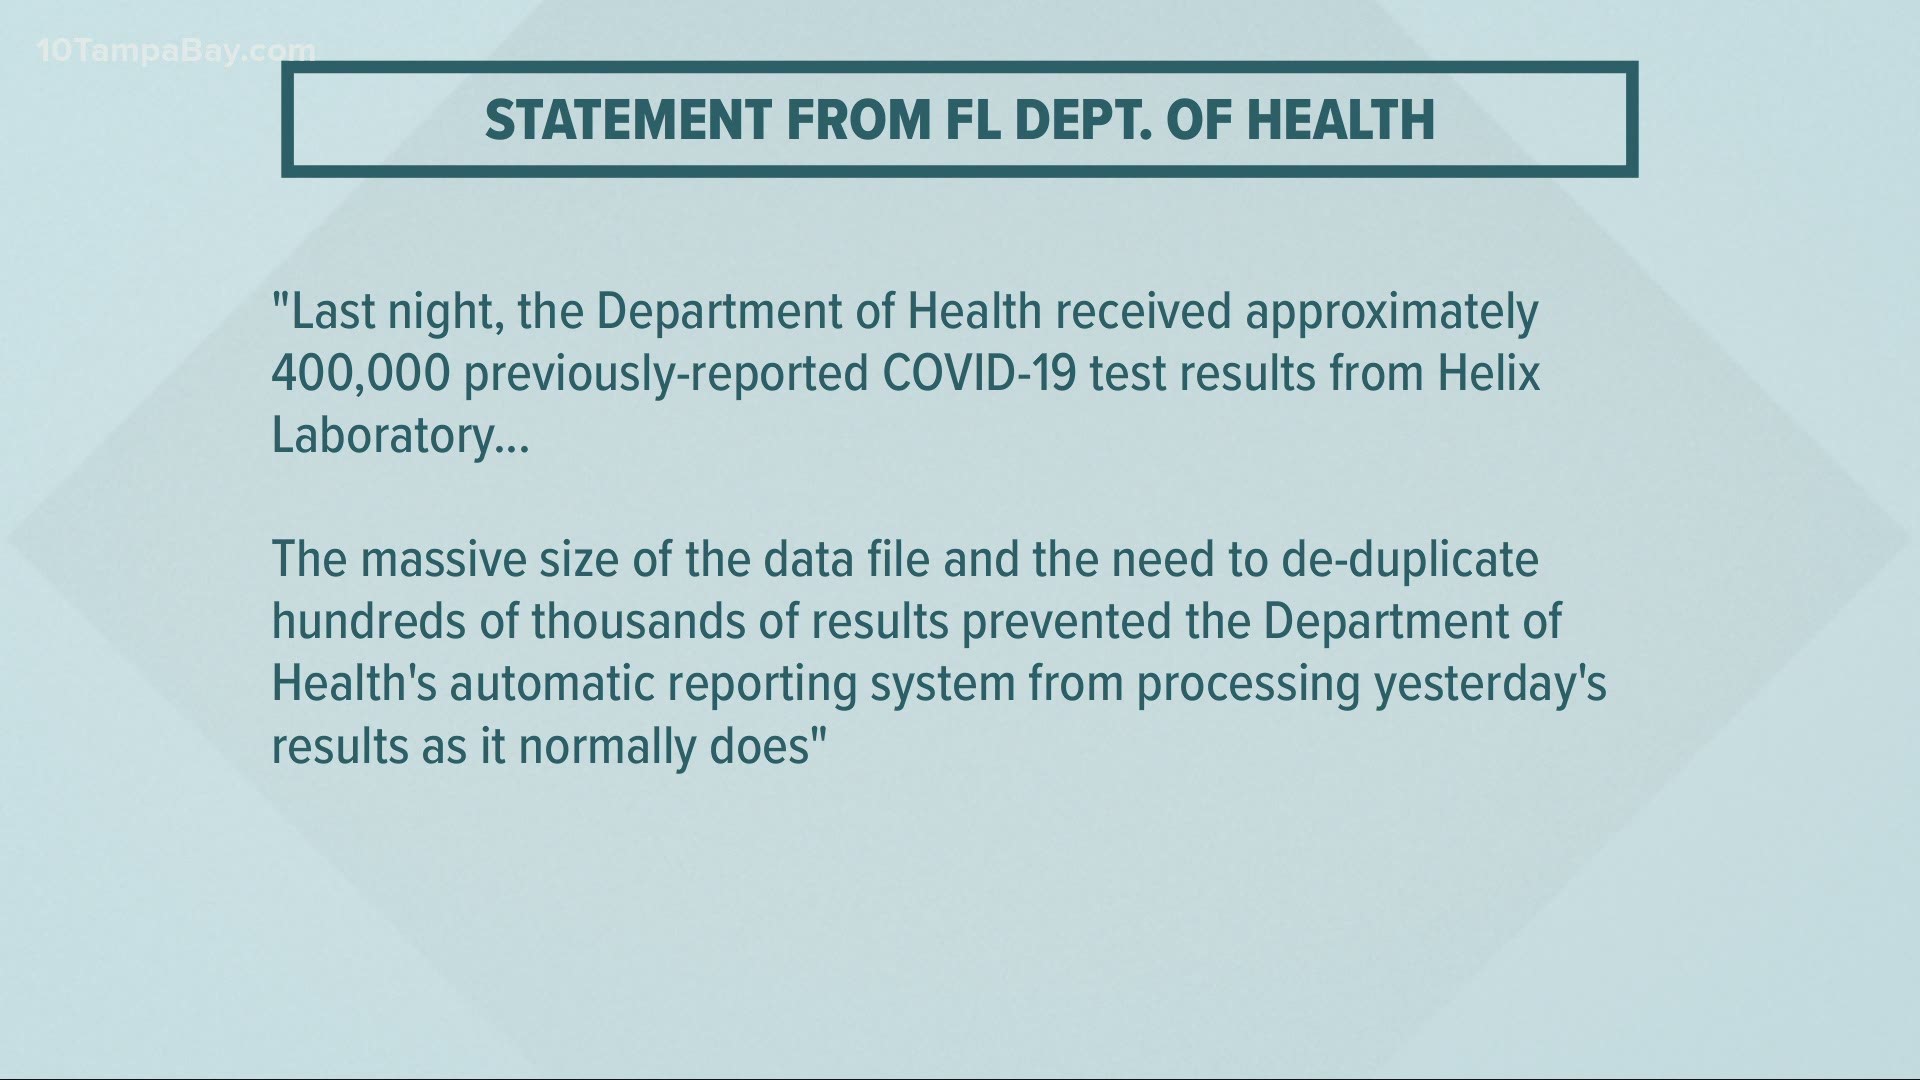 The state stressed that this reporting issue is not related to notifying individuals of their test results.